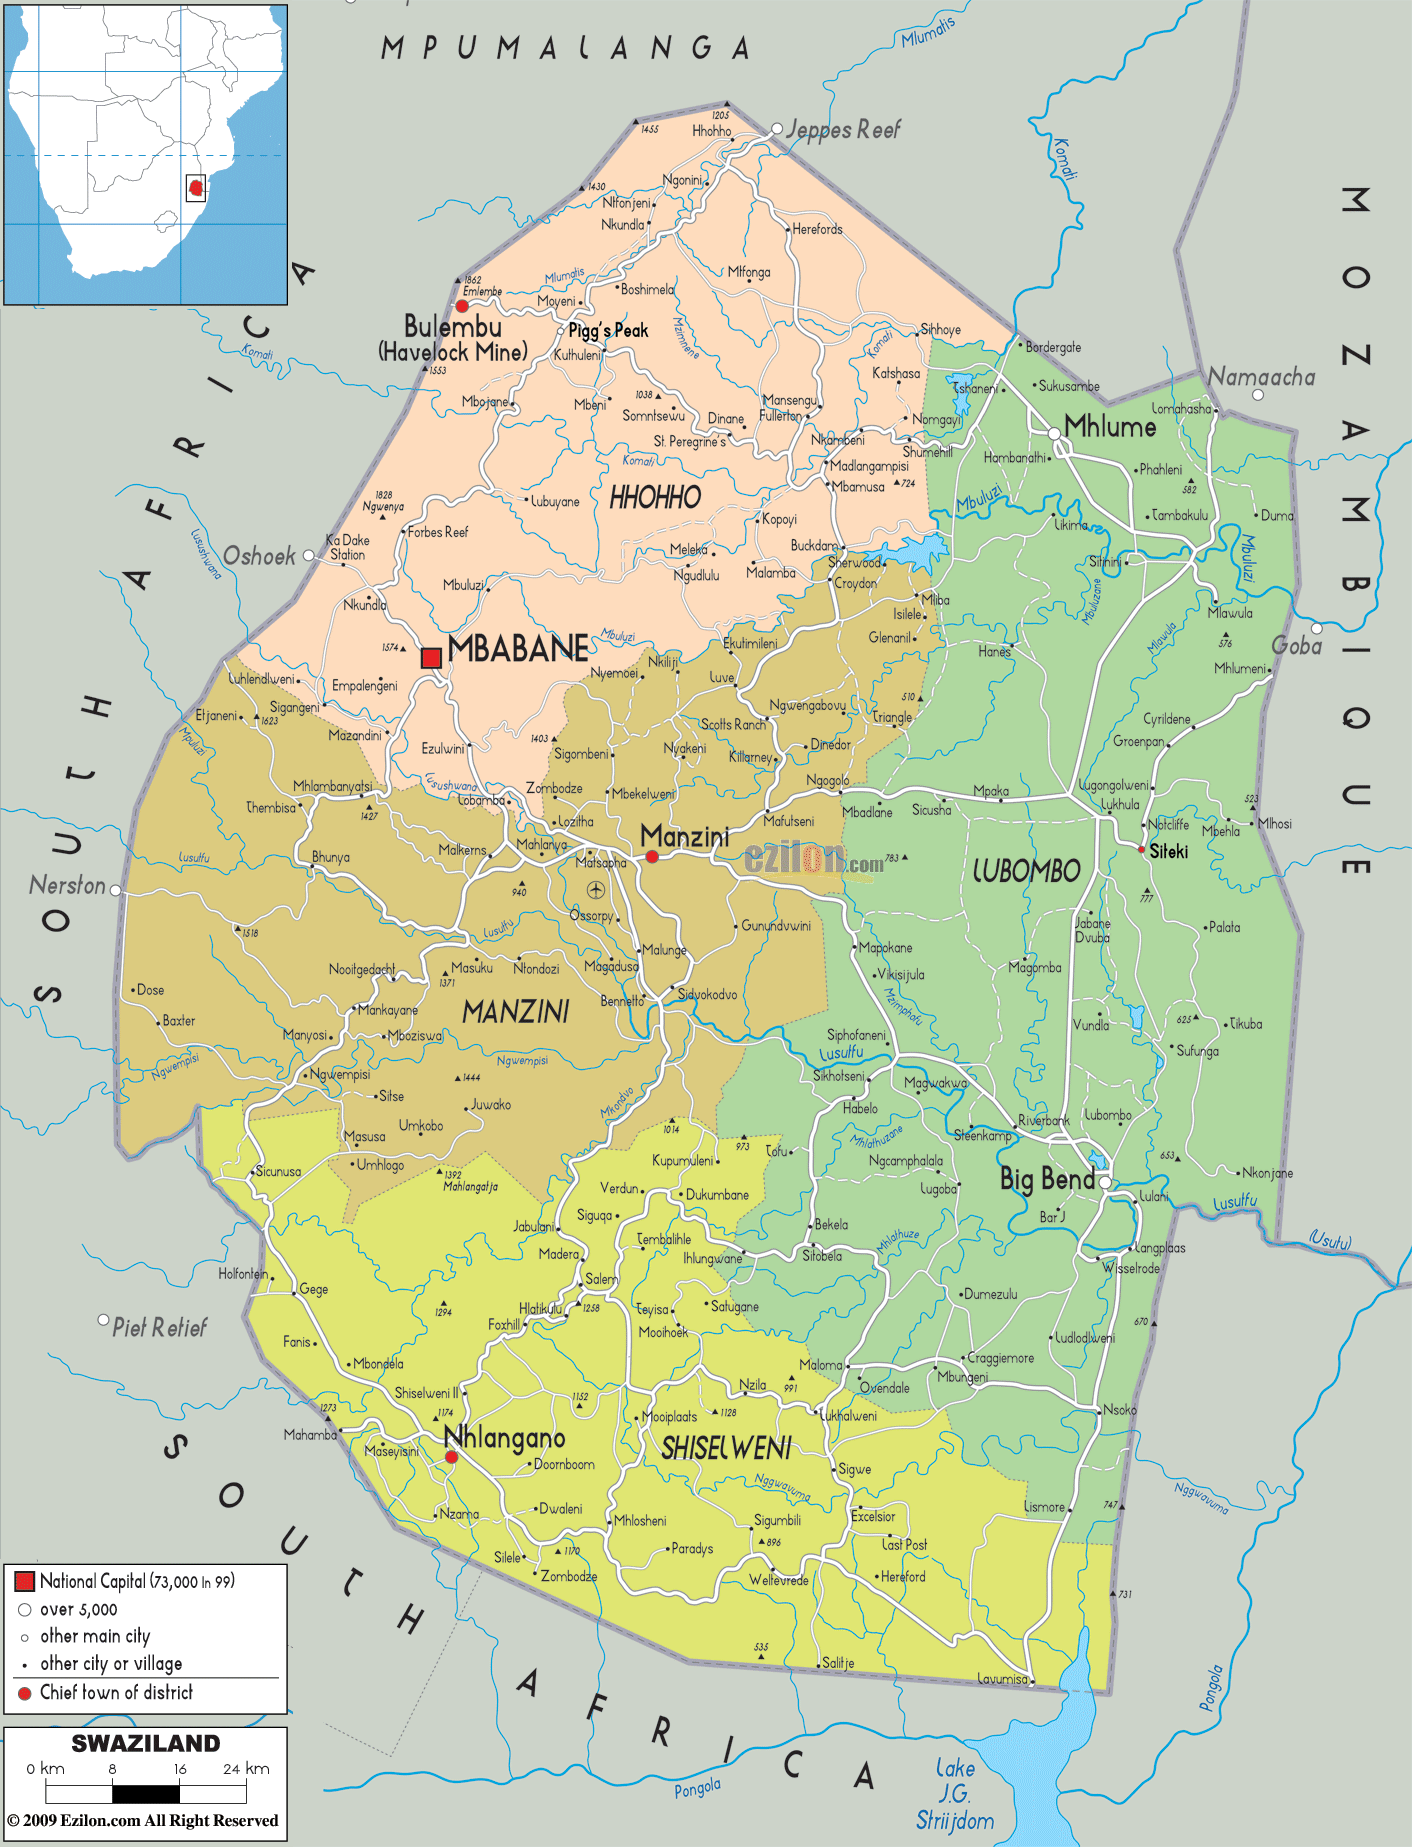 political-map-of-Swaziland